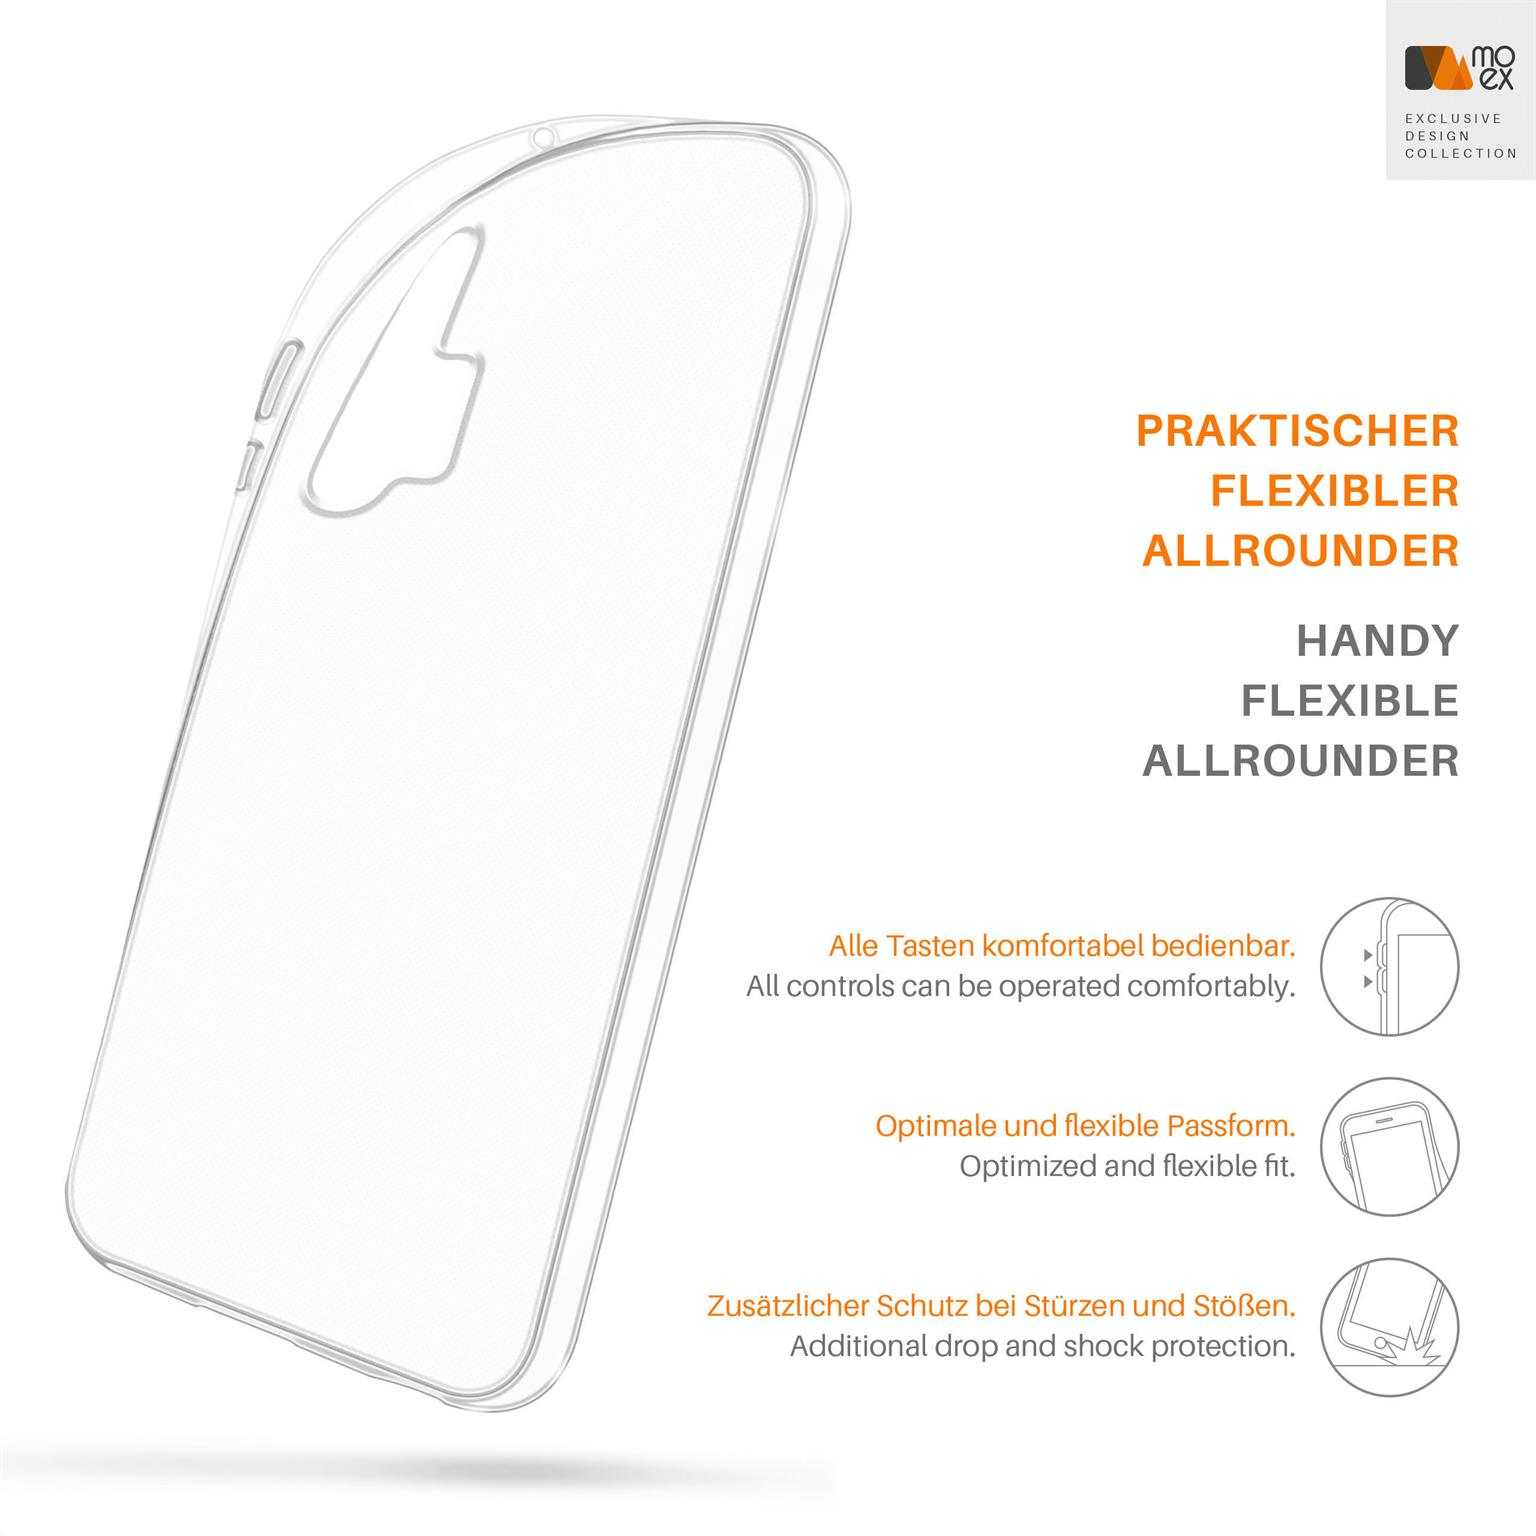 Pro, Aero 20 Honor, Case, Backcover, Crystal-Clear MOEX